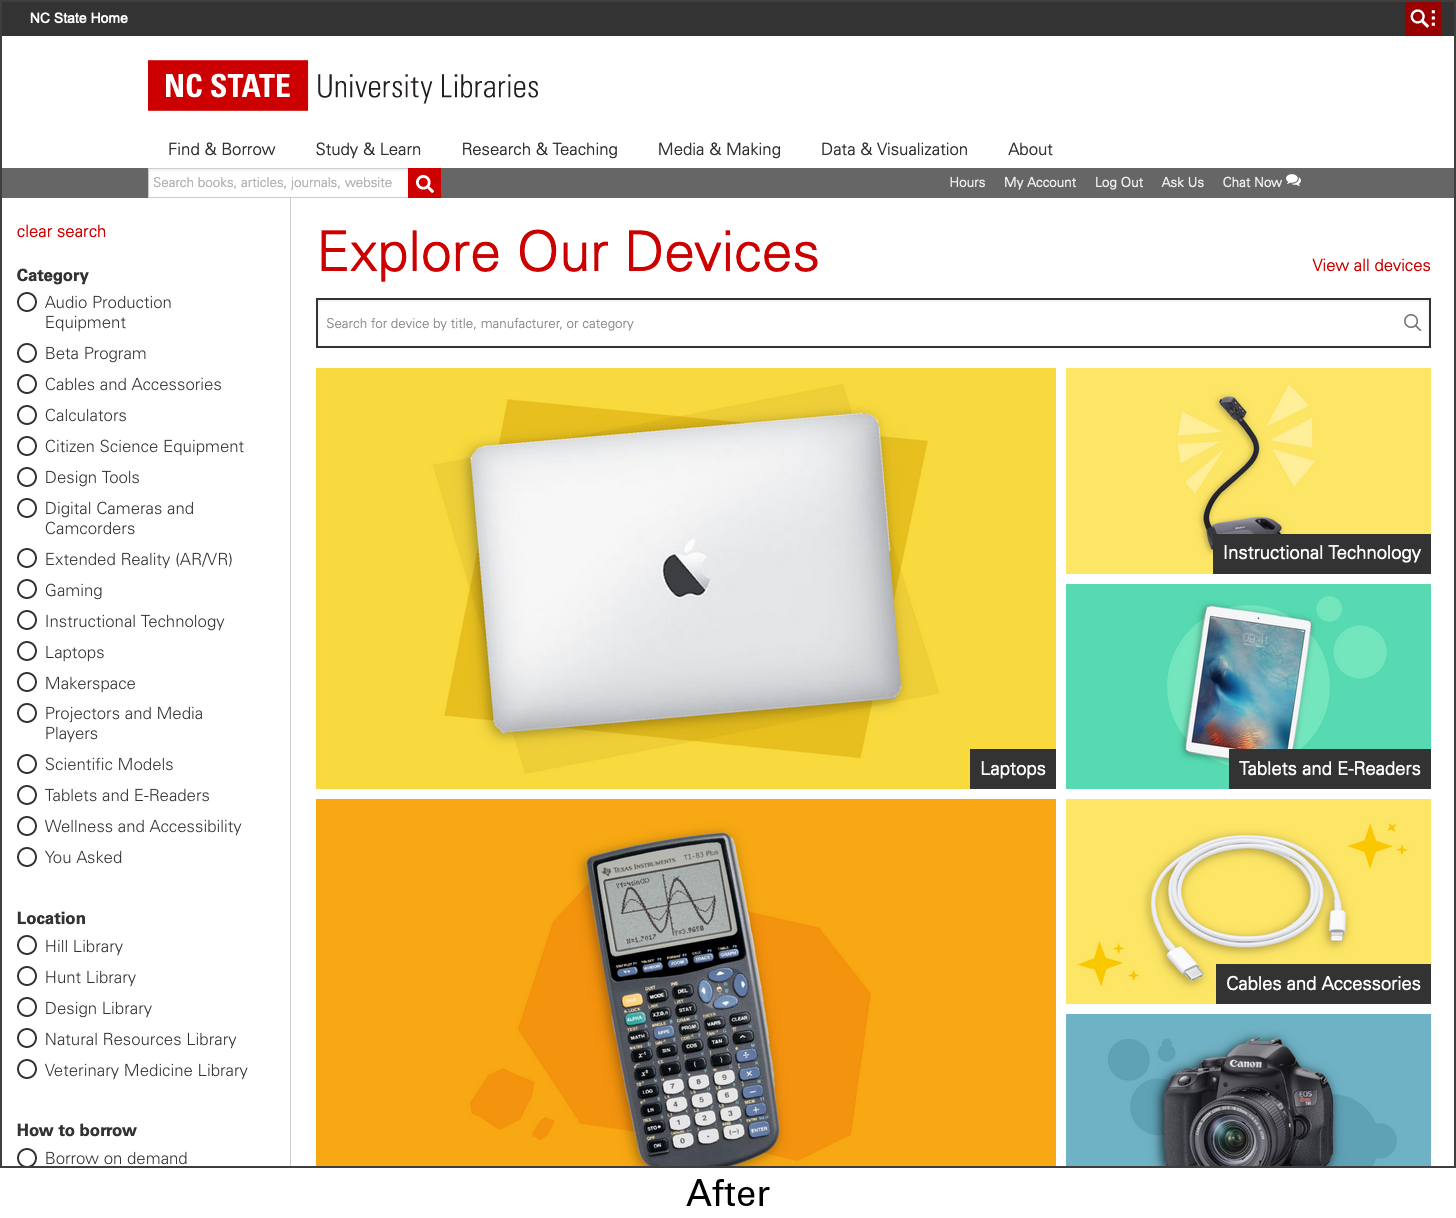 Explore Our Devices page, with search box, filters, and fun images. The design is intereactive and exciting